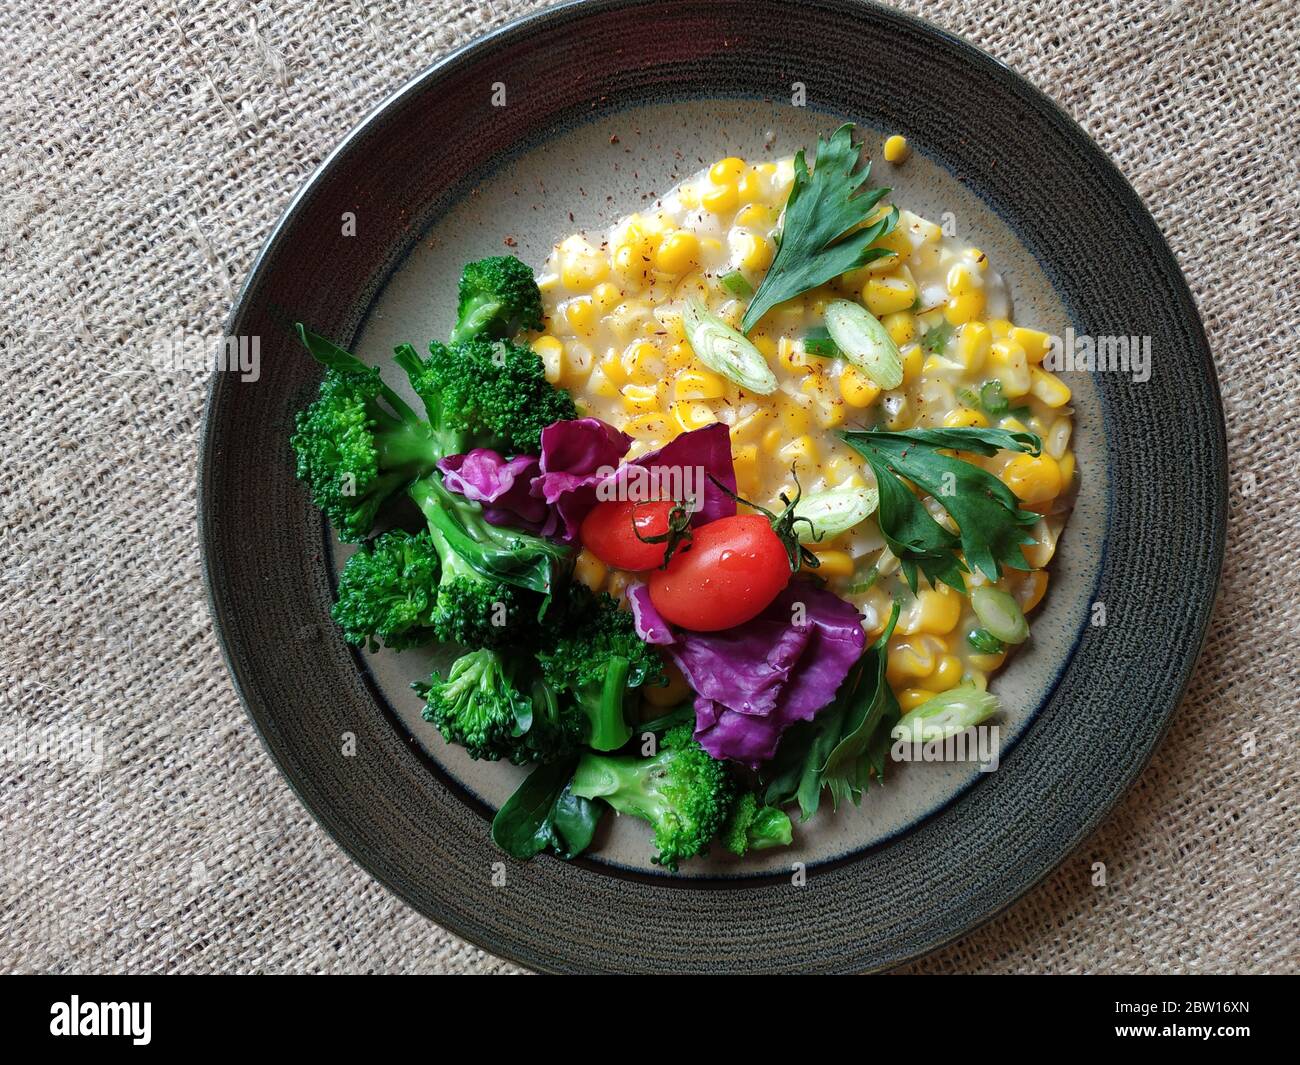 Indonesian cornmeal grits with broccoli, tomatoes, and sliced ​​purple cabbage served on plate Stock Photo